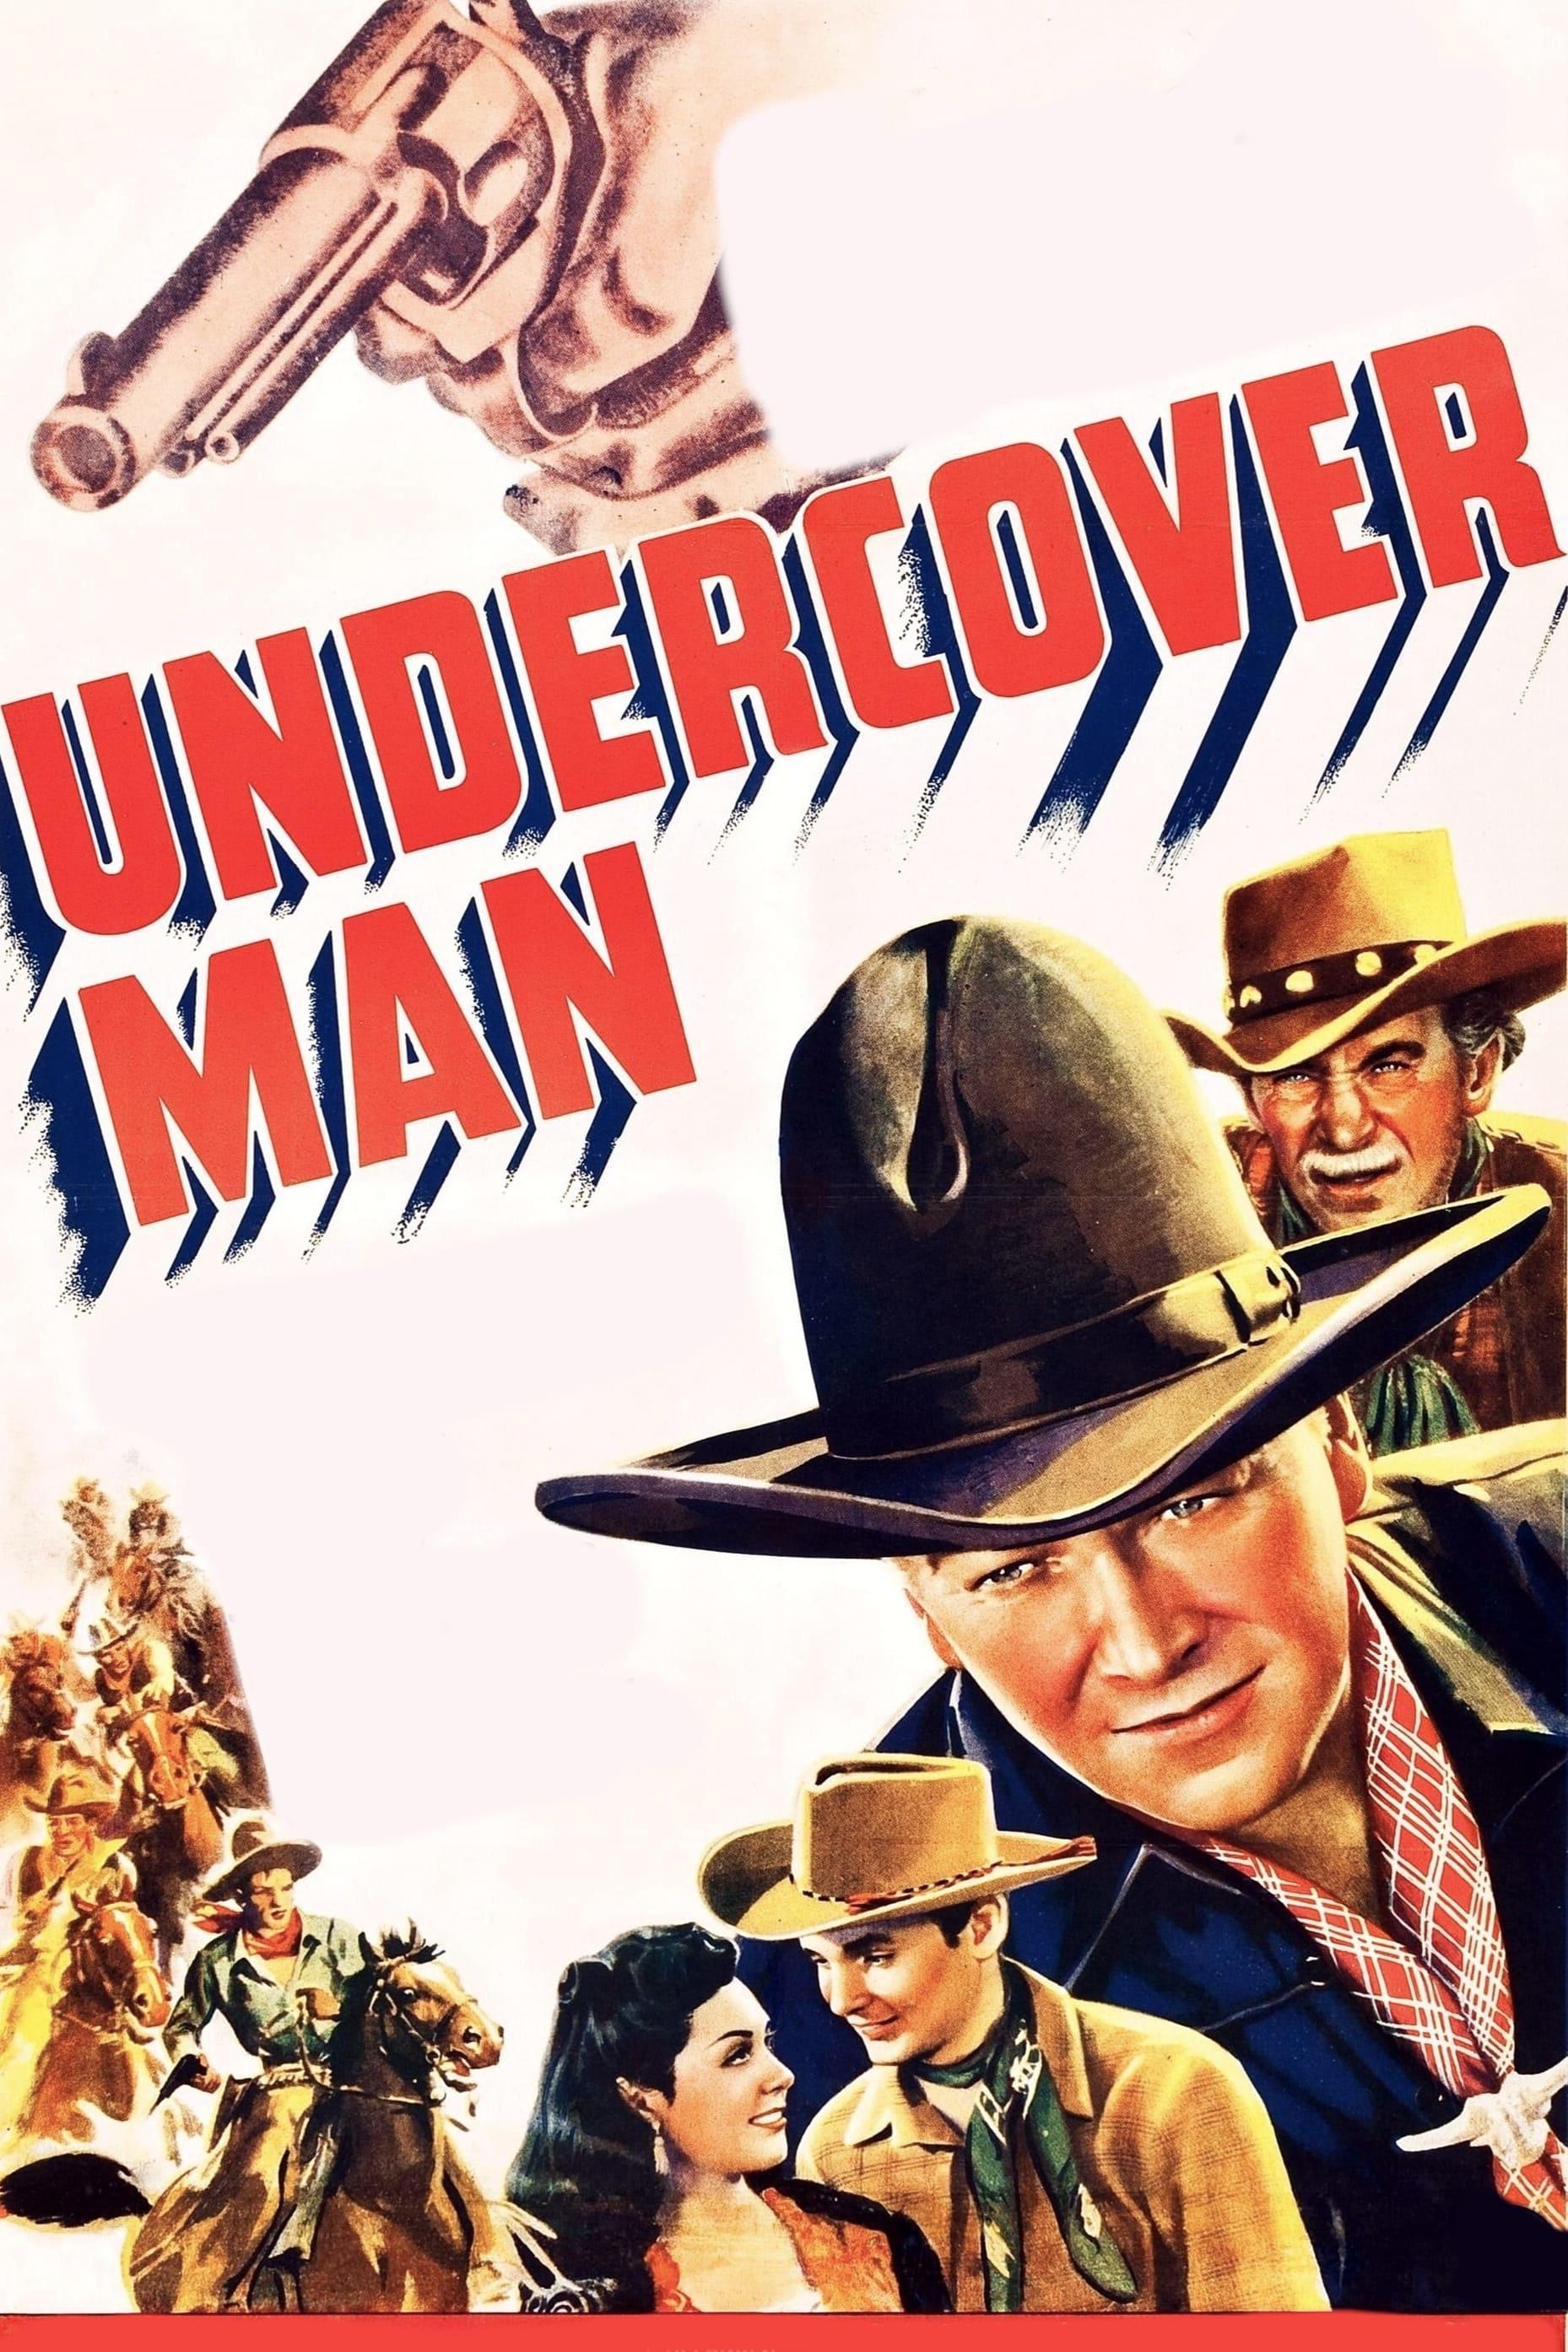 Undercover Man poster